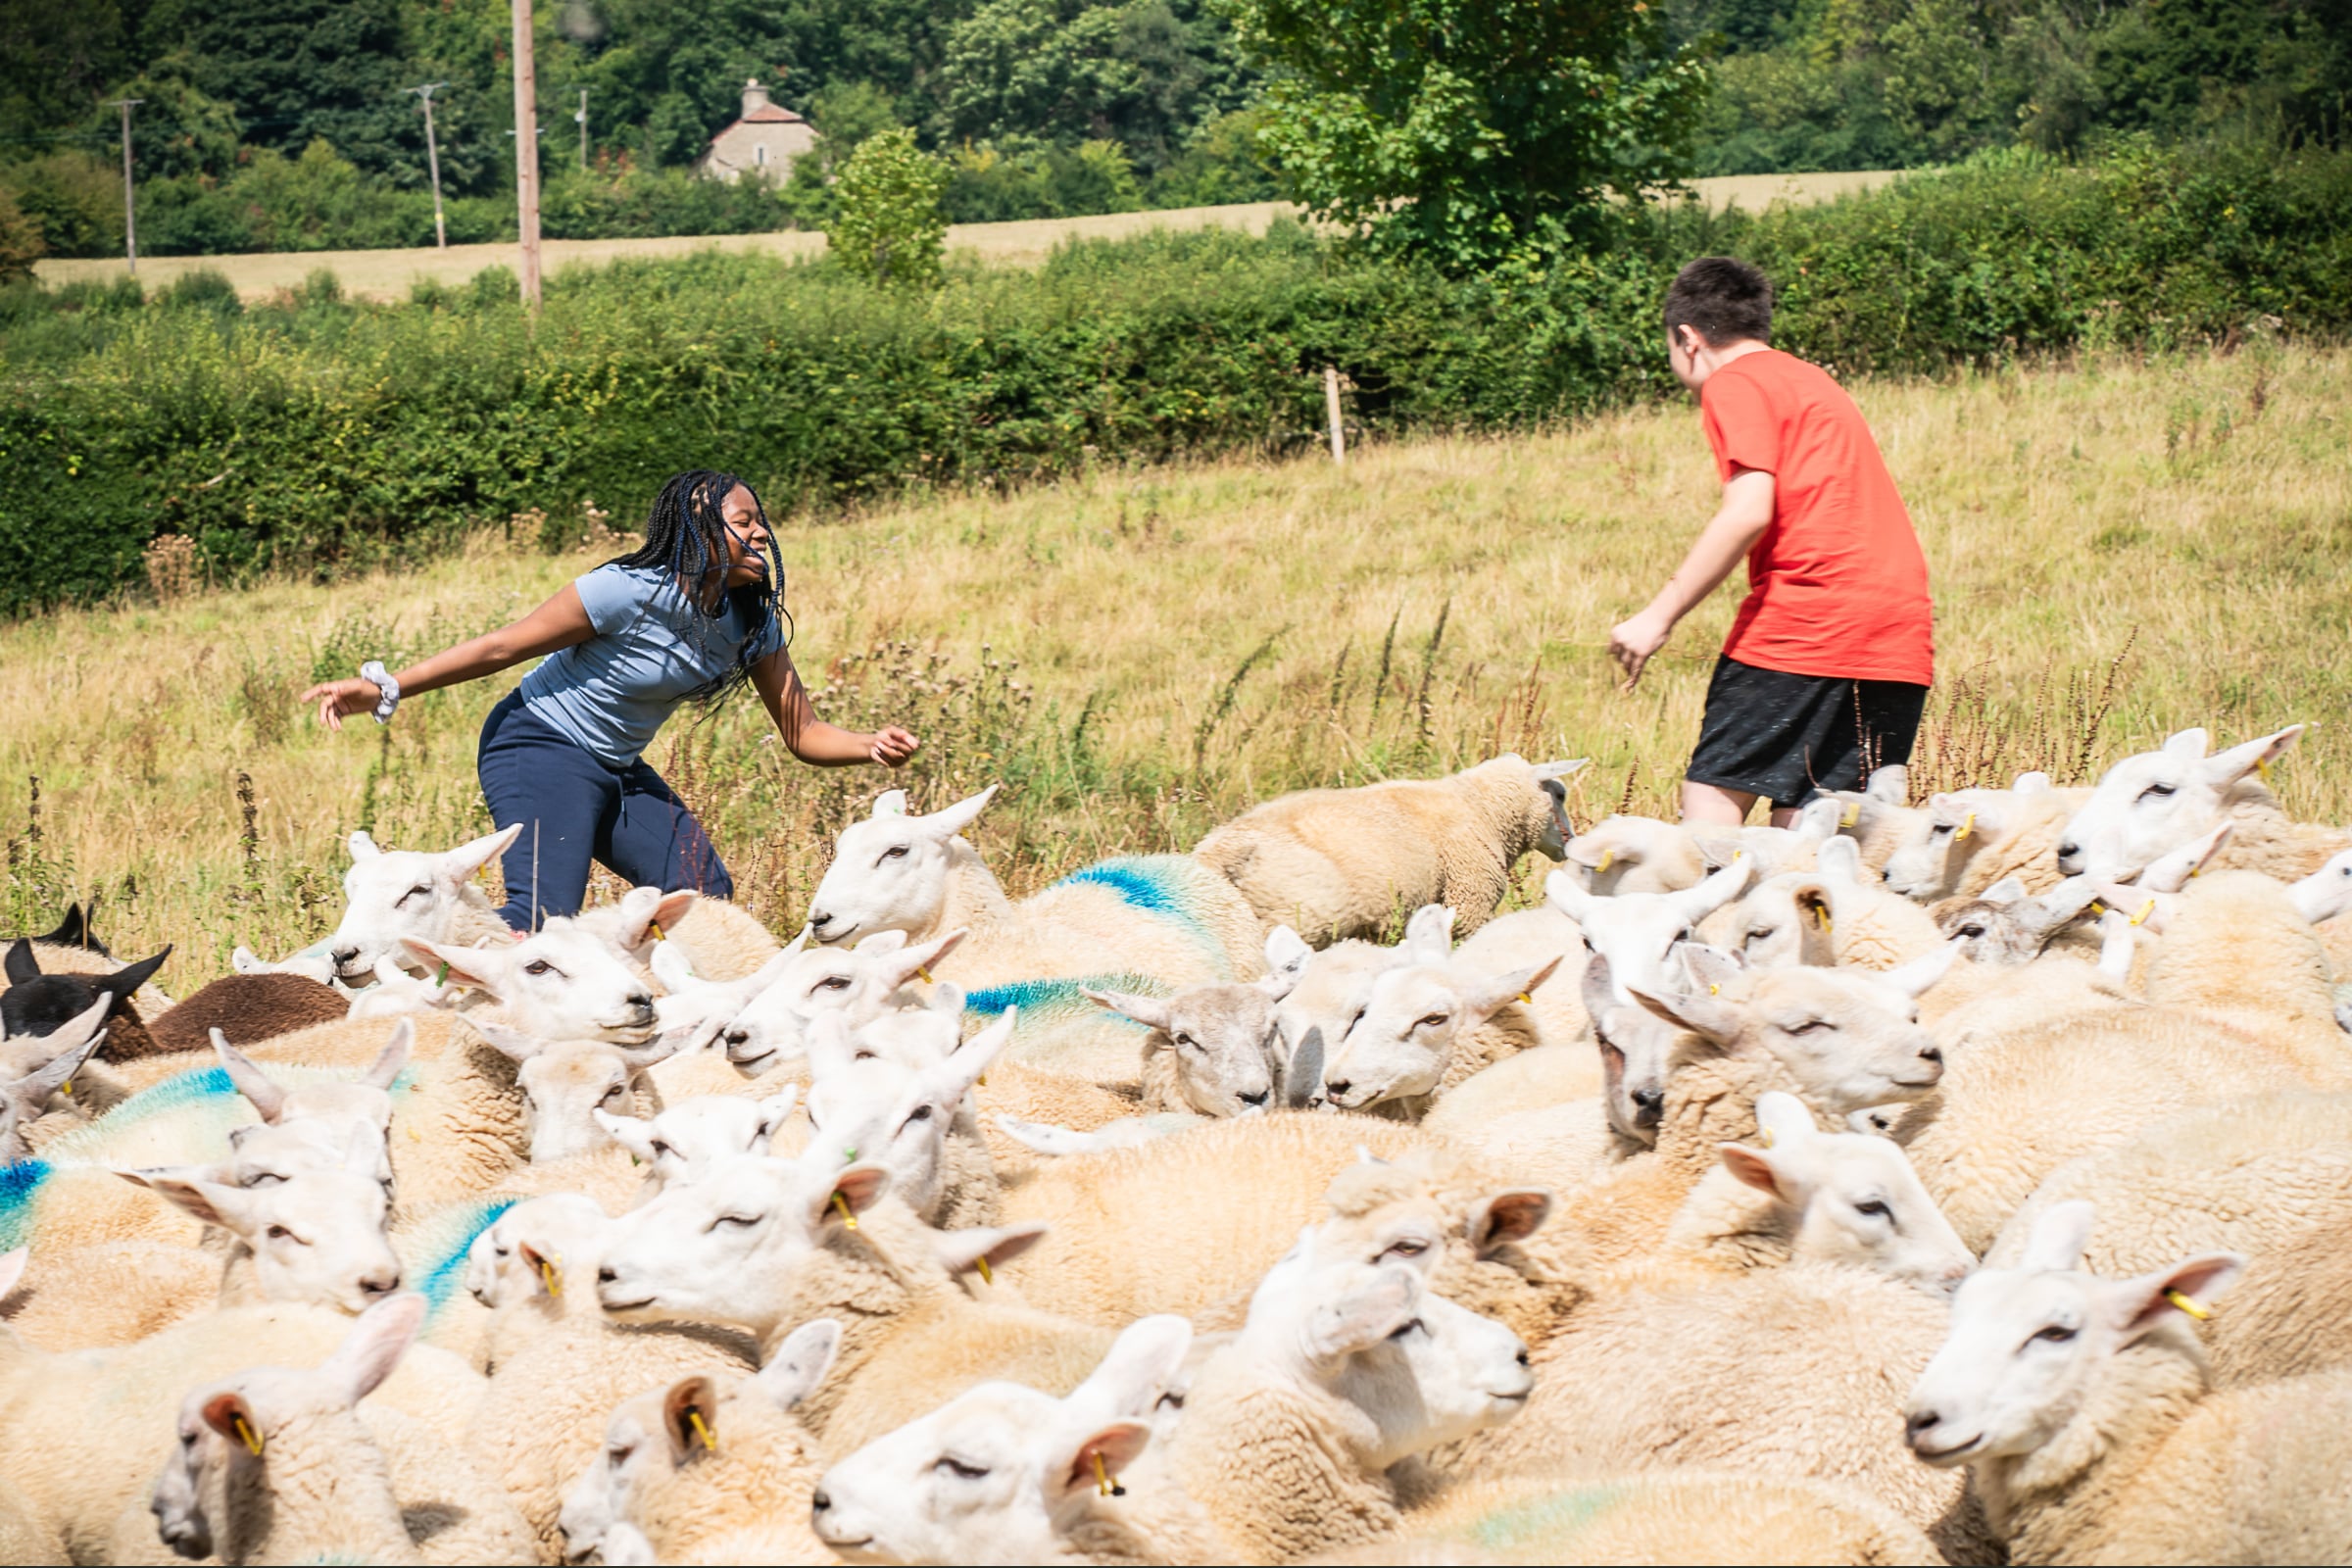 Two young people laughing herding sheep